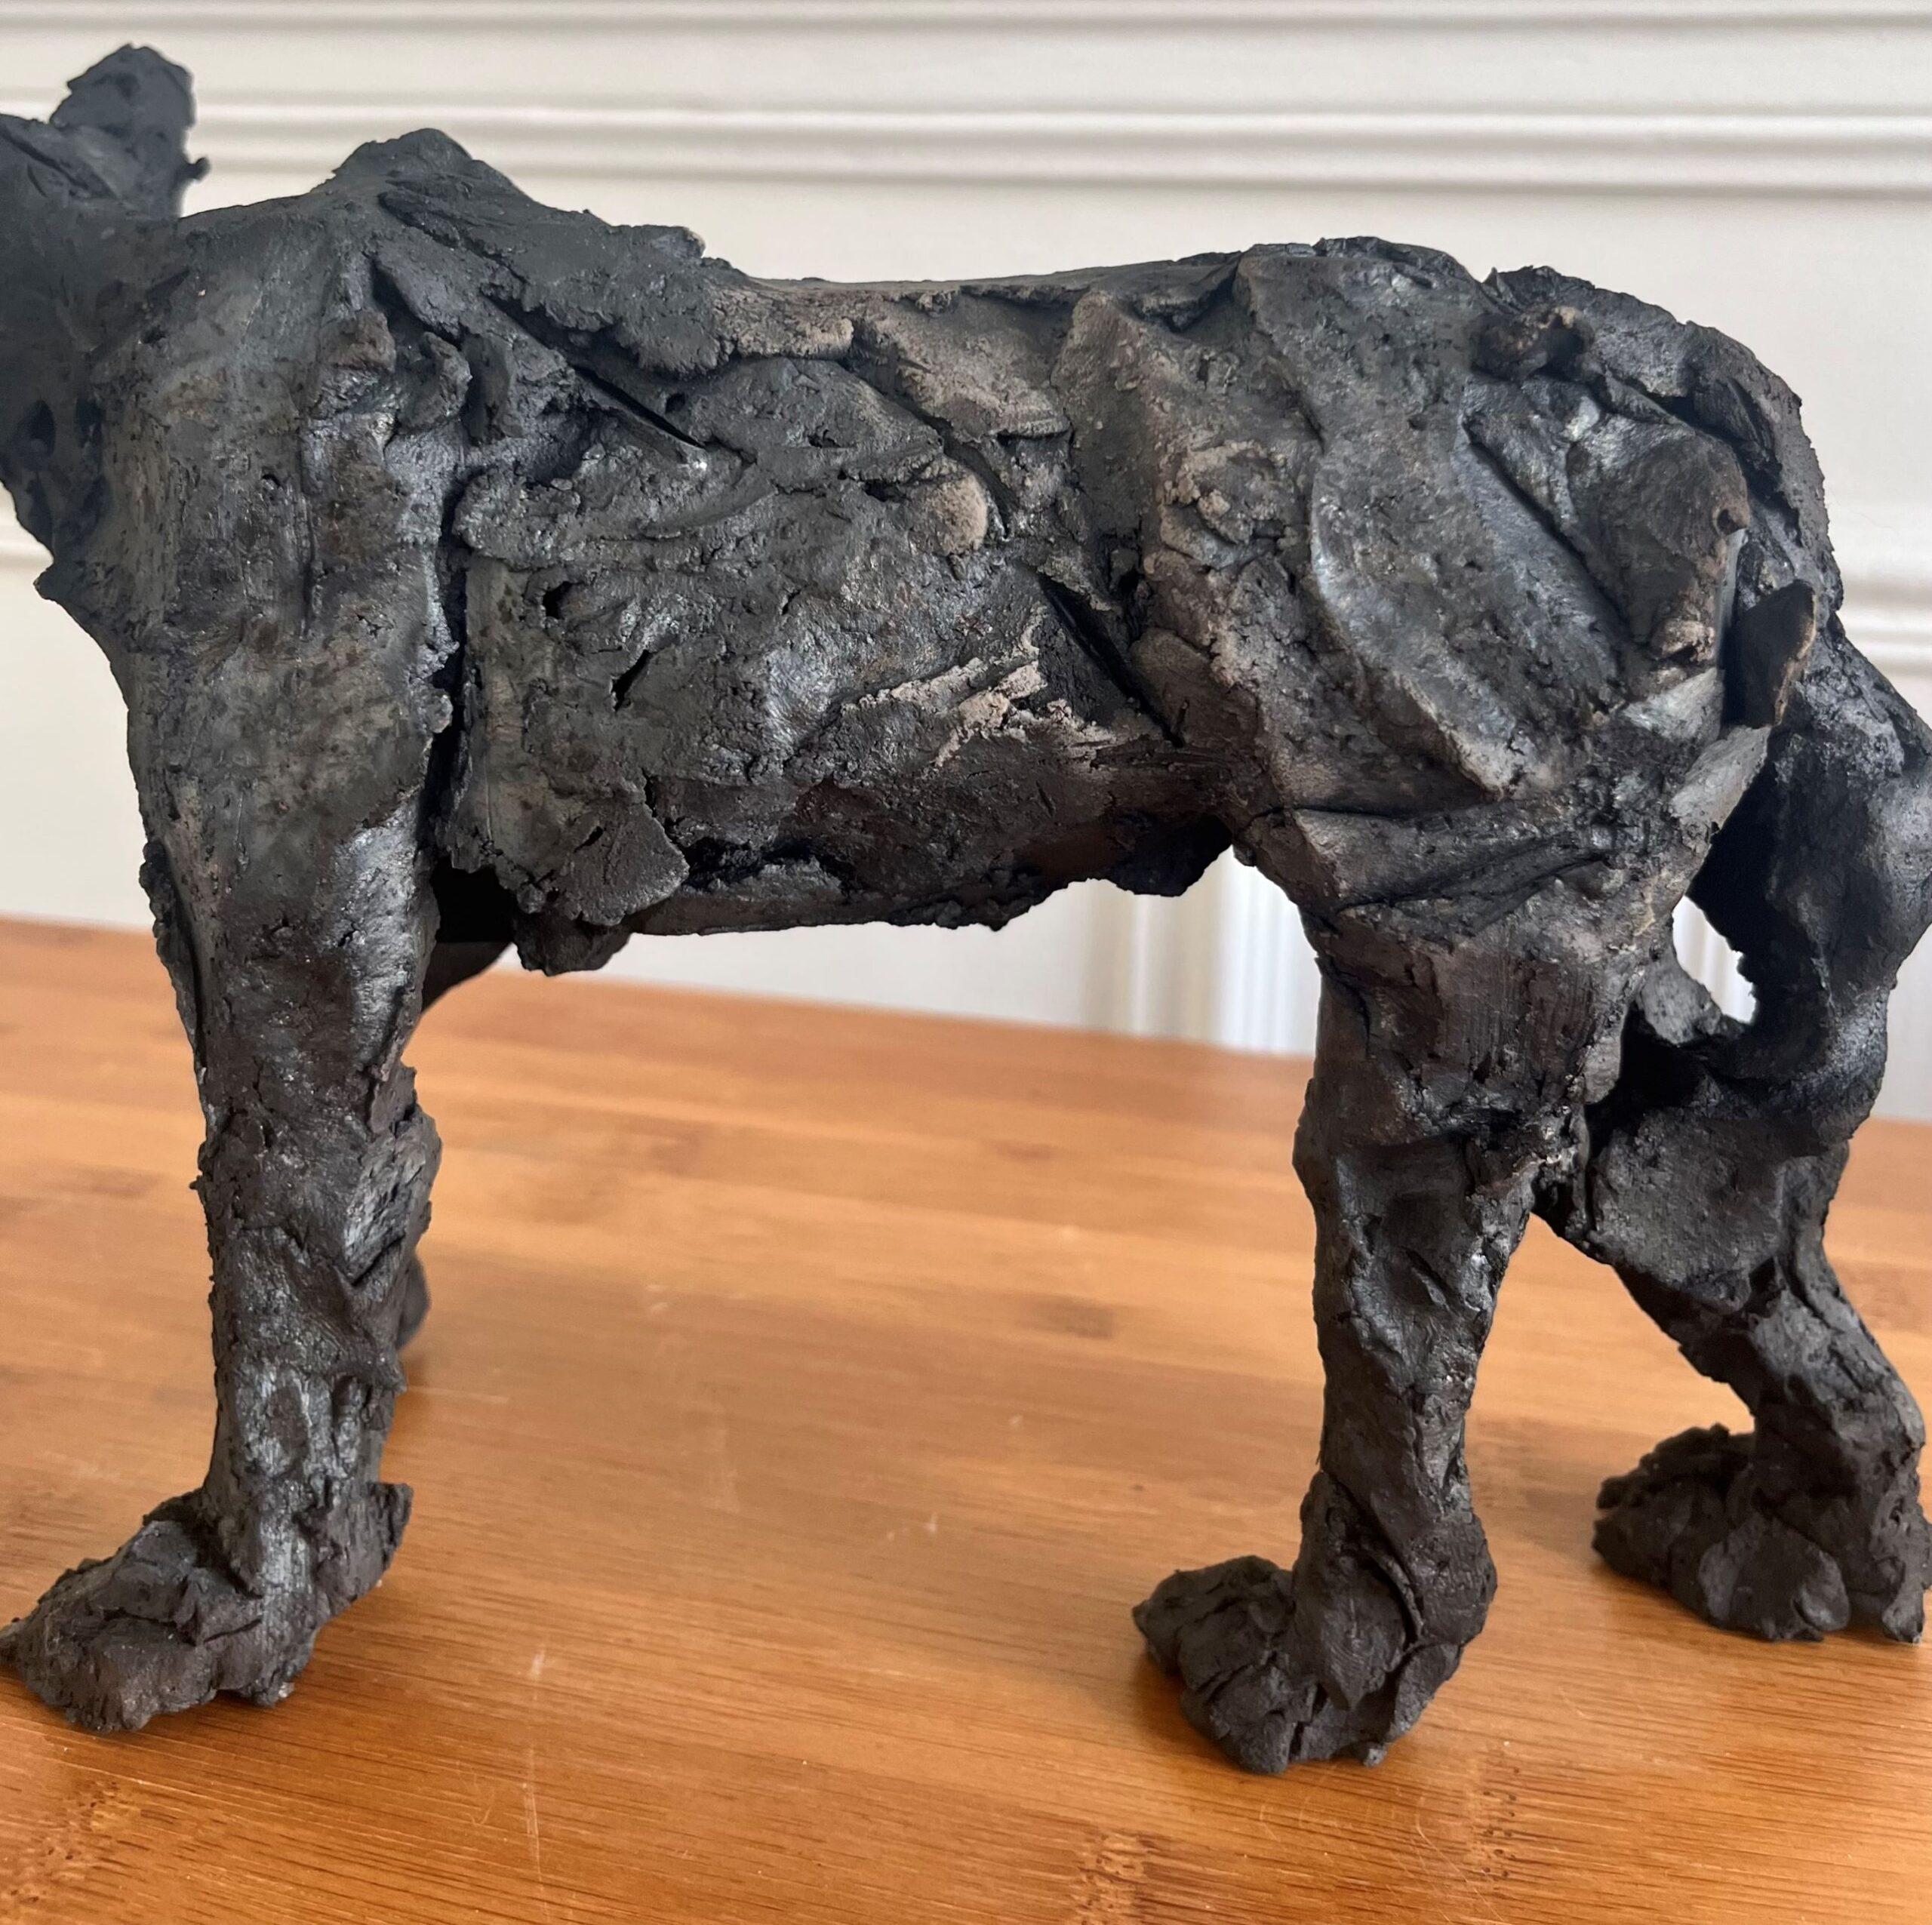 Wolf II is a unique smoke-fired sandstone sculpture by French contemporary artist Cécile Raynal, dimensions are 19 × 9 × 27 cm (7.5 × 3.5 × 10.6 in). 
This sculpture is unique and comes with an authenticity certificate.

Cécile Raynal uses sculpture